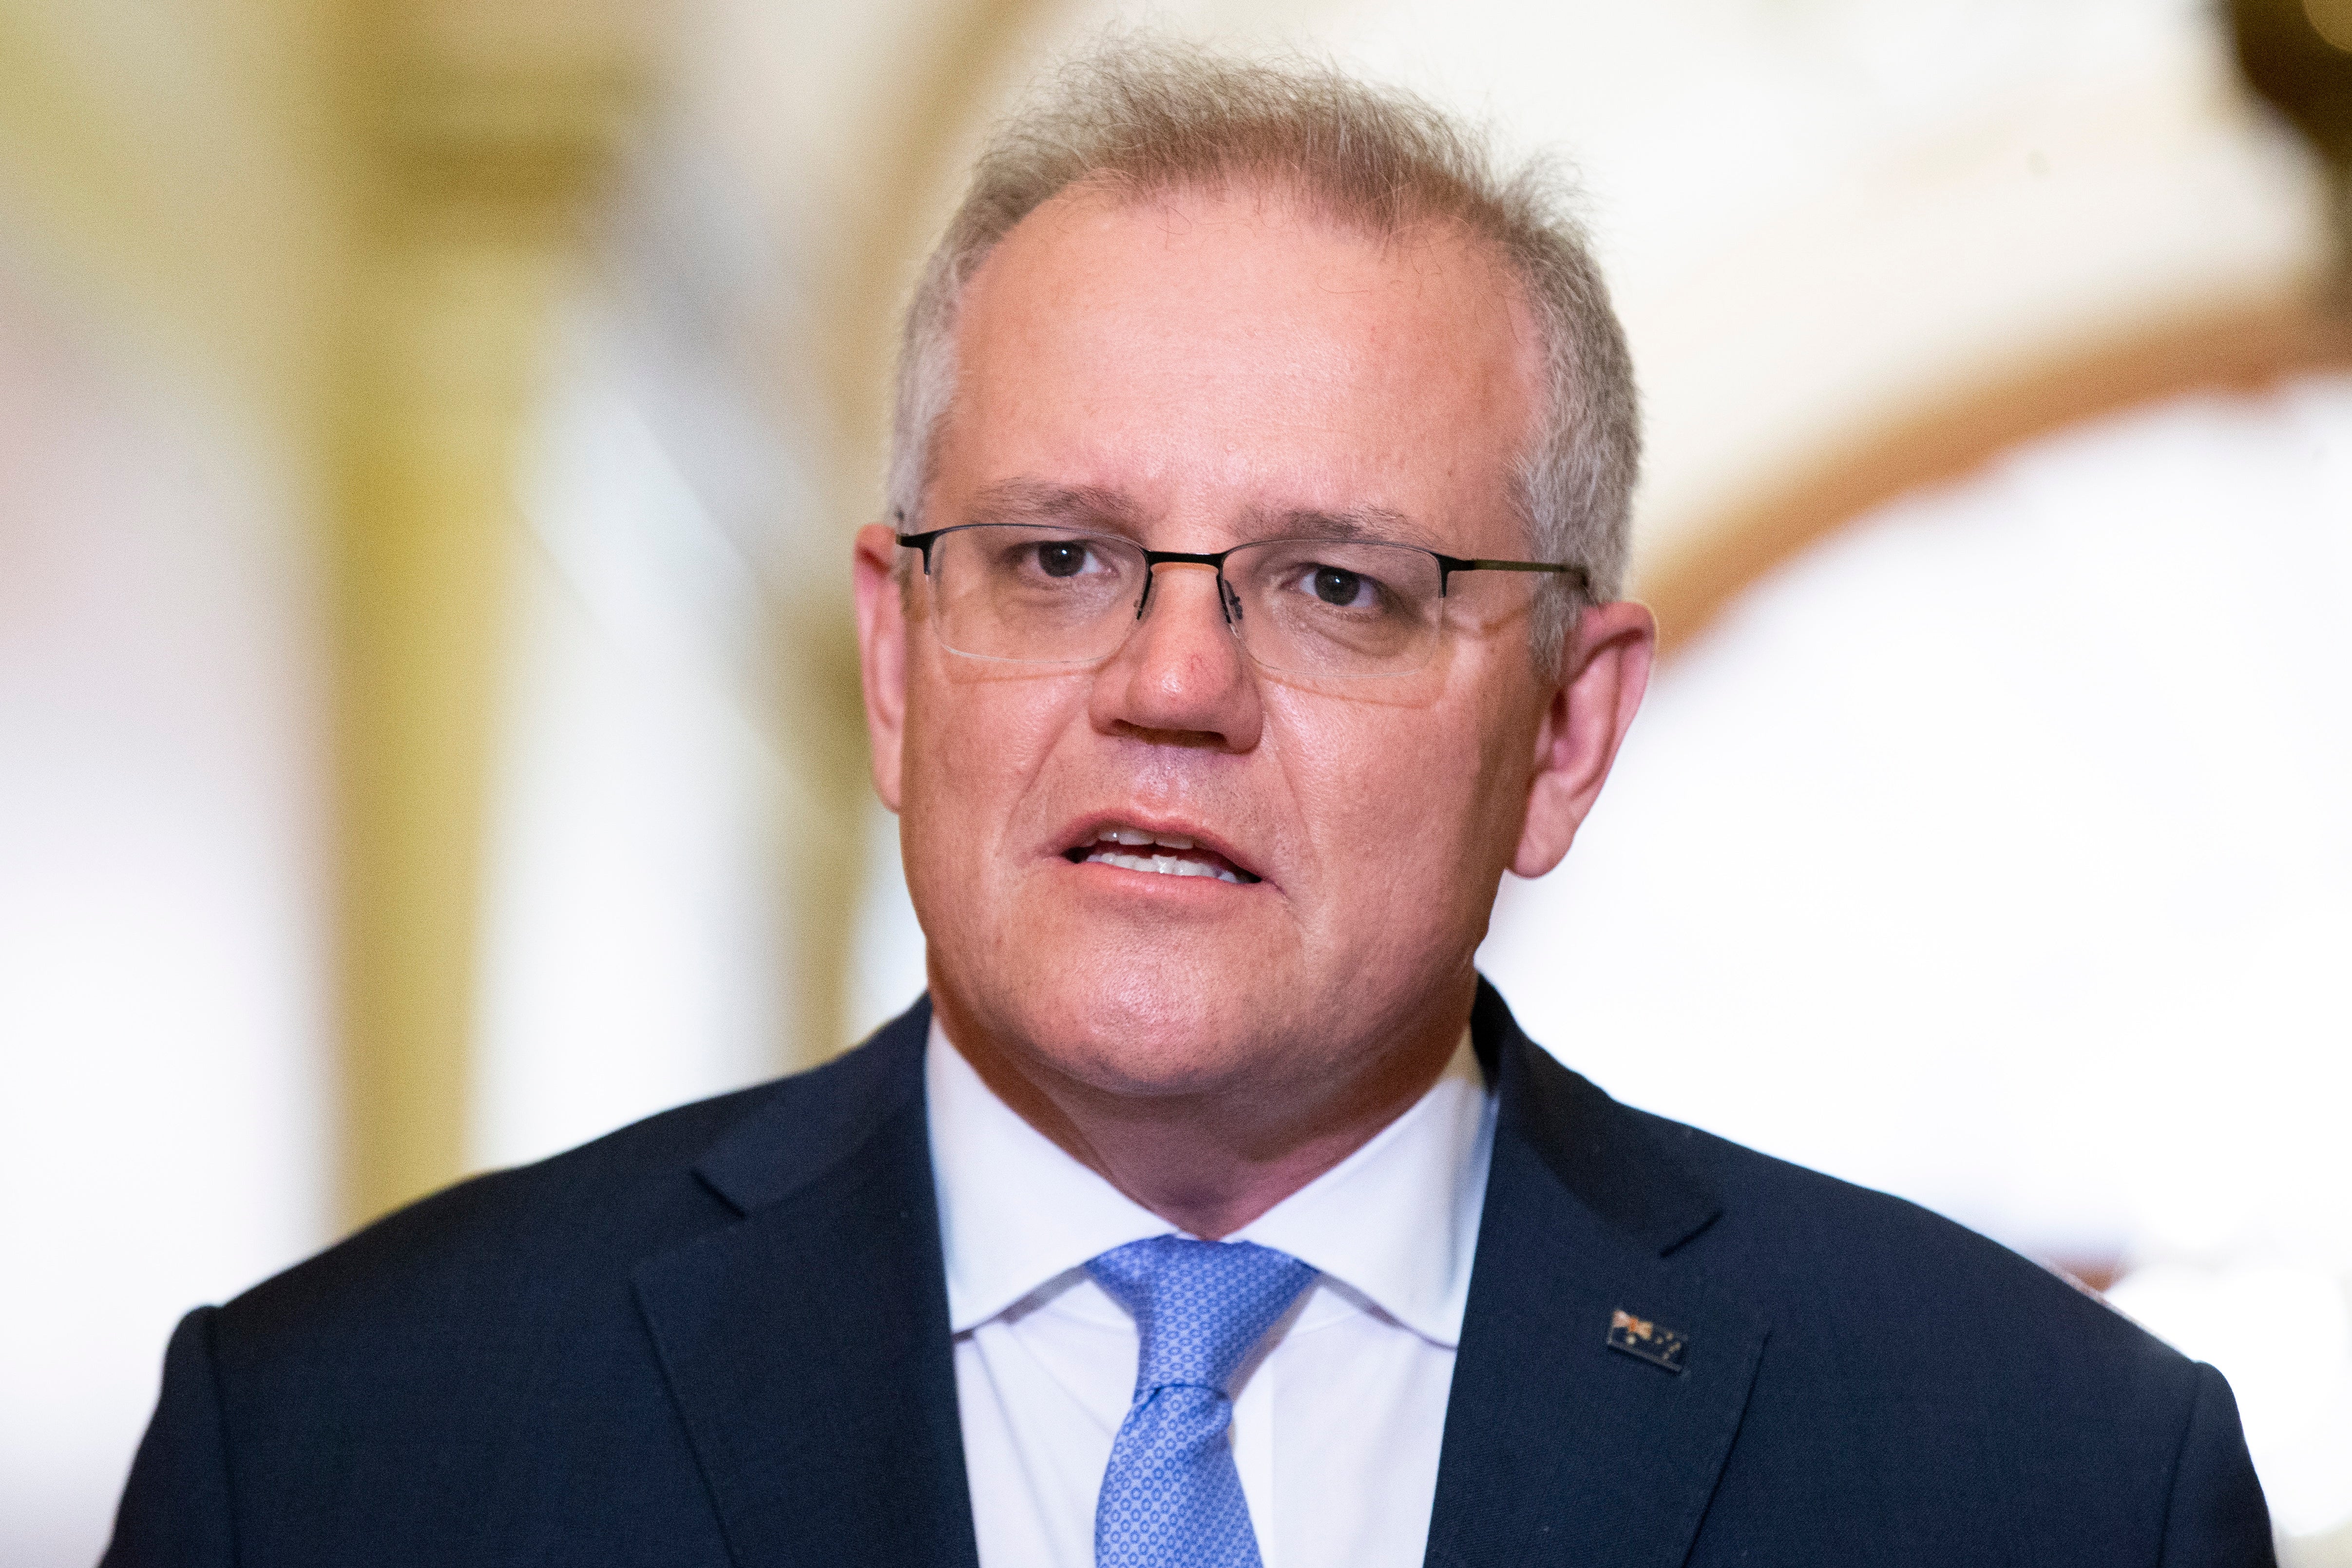 File image: Scott Morrison says he would rather focus on the Covid situation in Australia